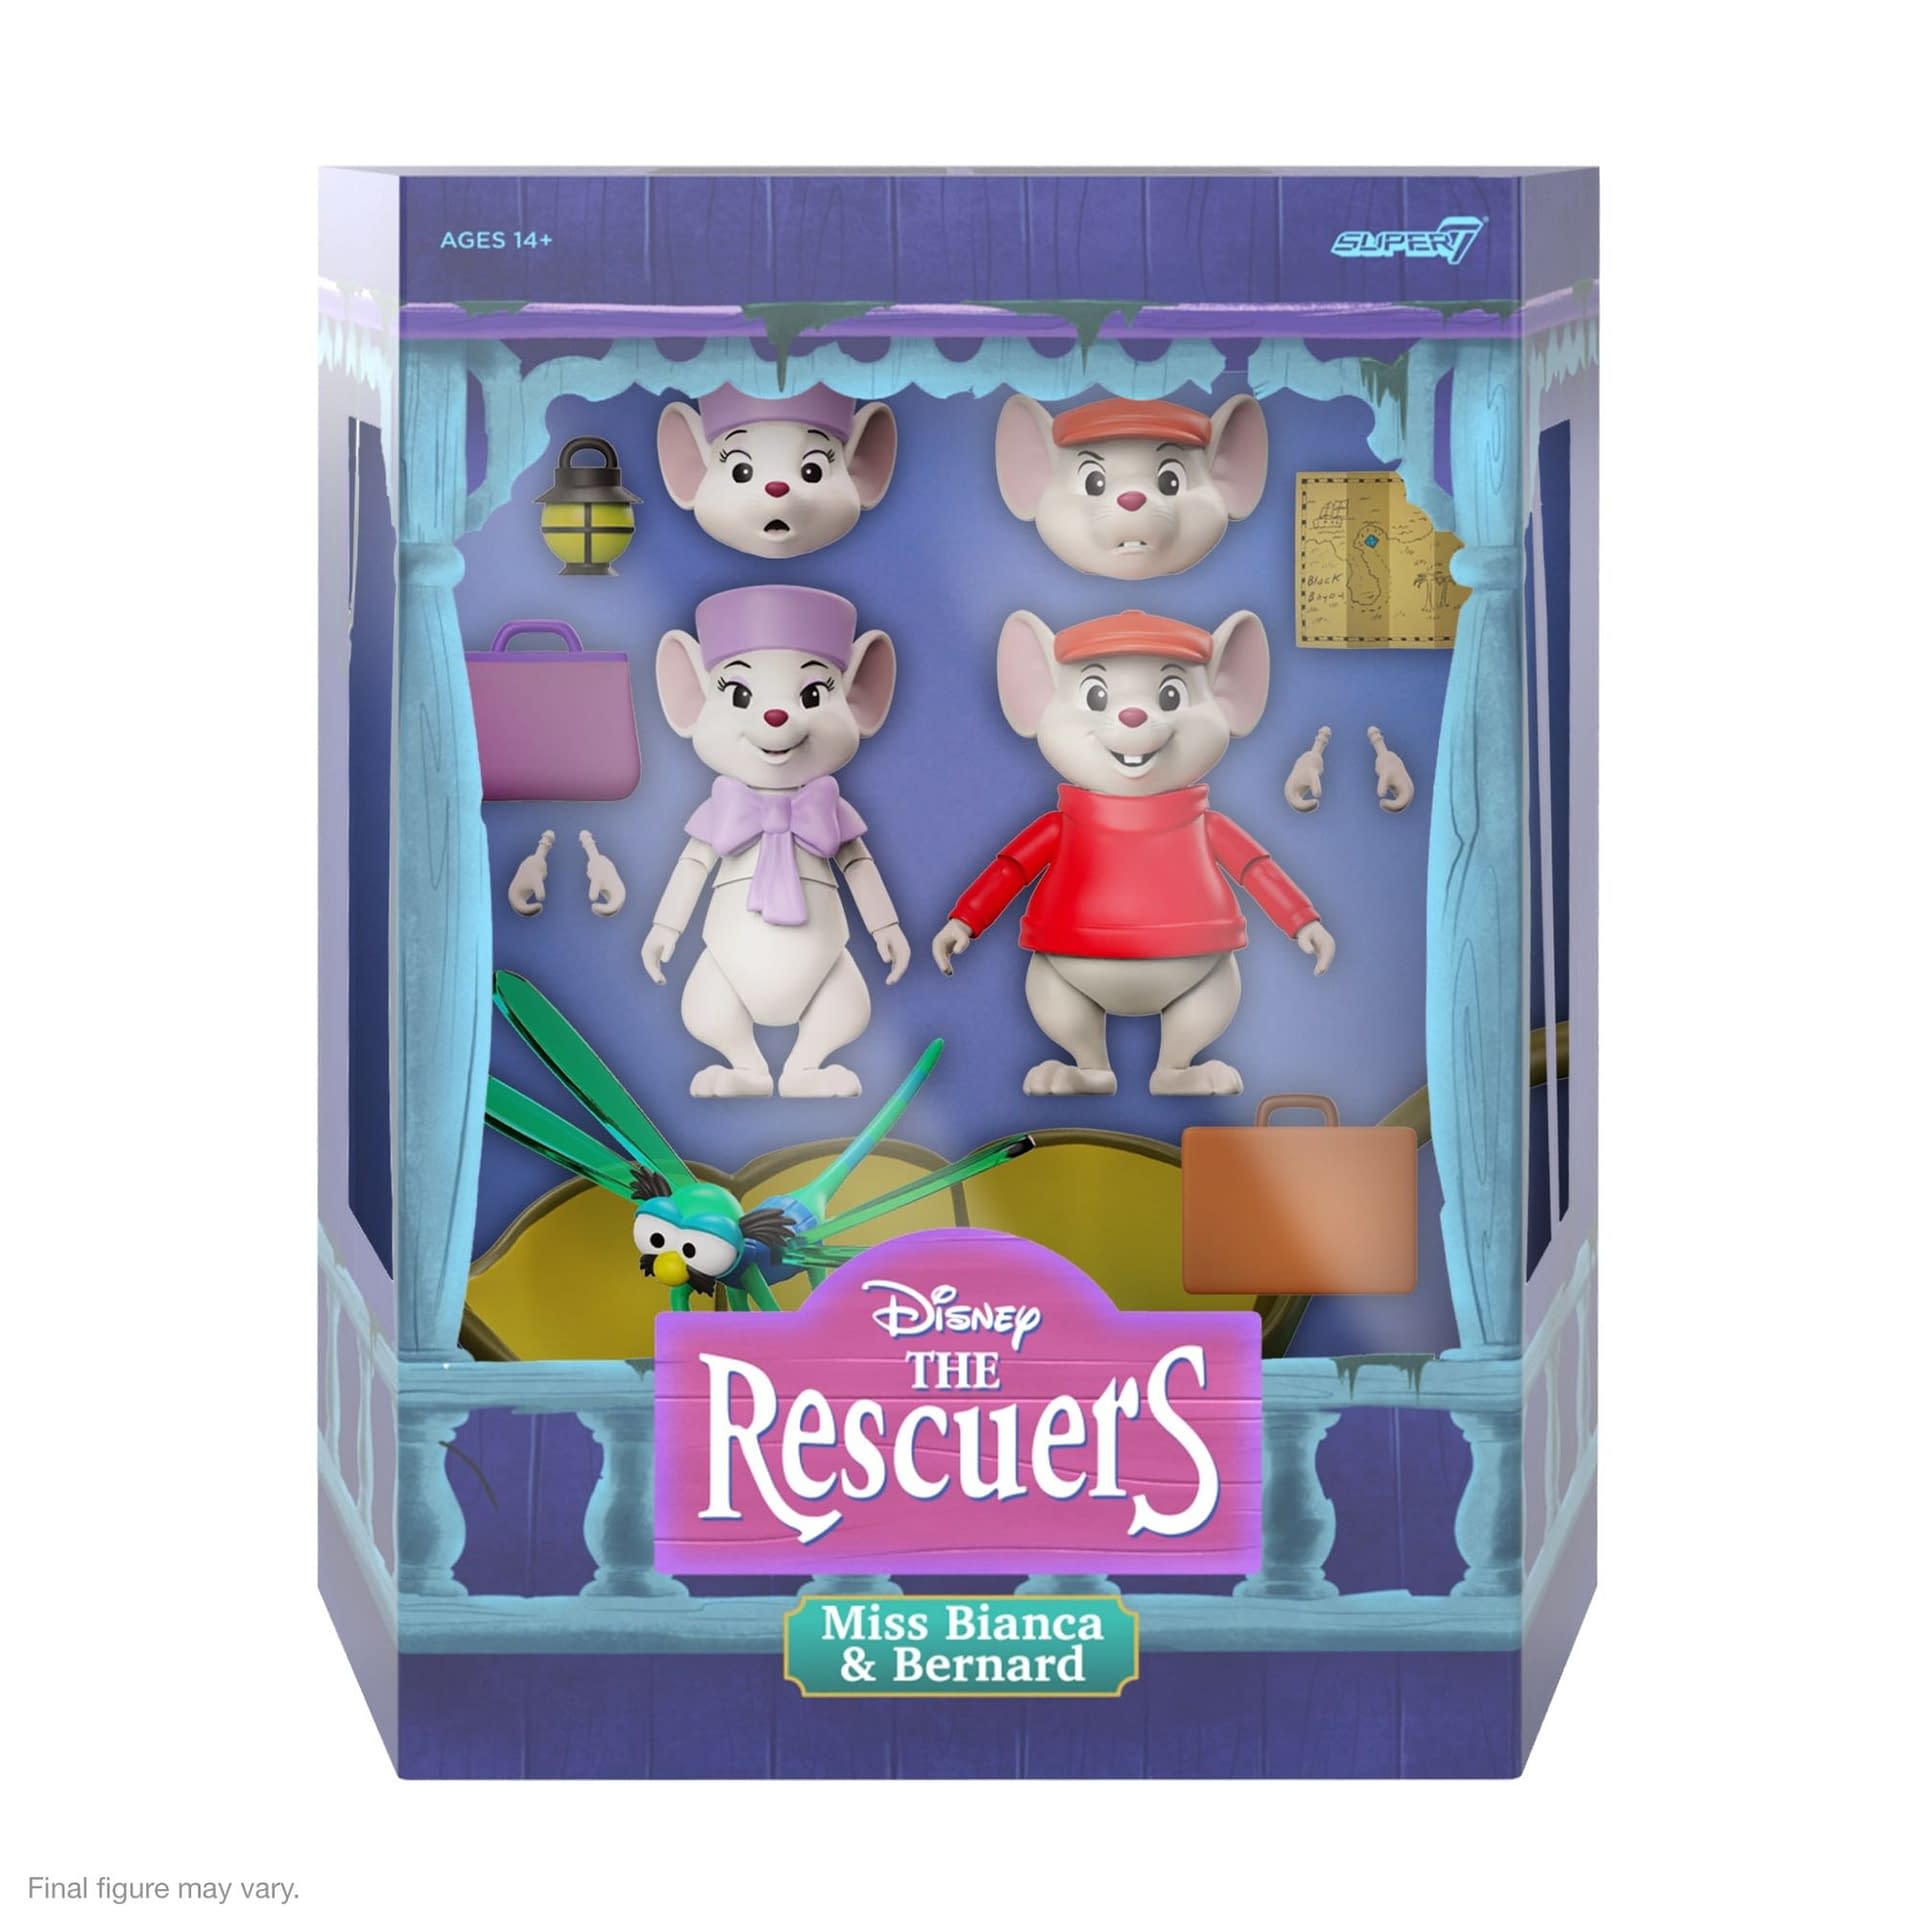 Disney's The Rescuers Comes to Life with Super7 ULTIMATES Line 